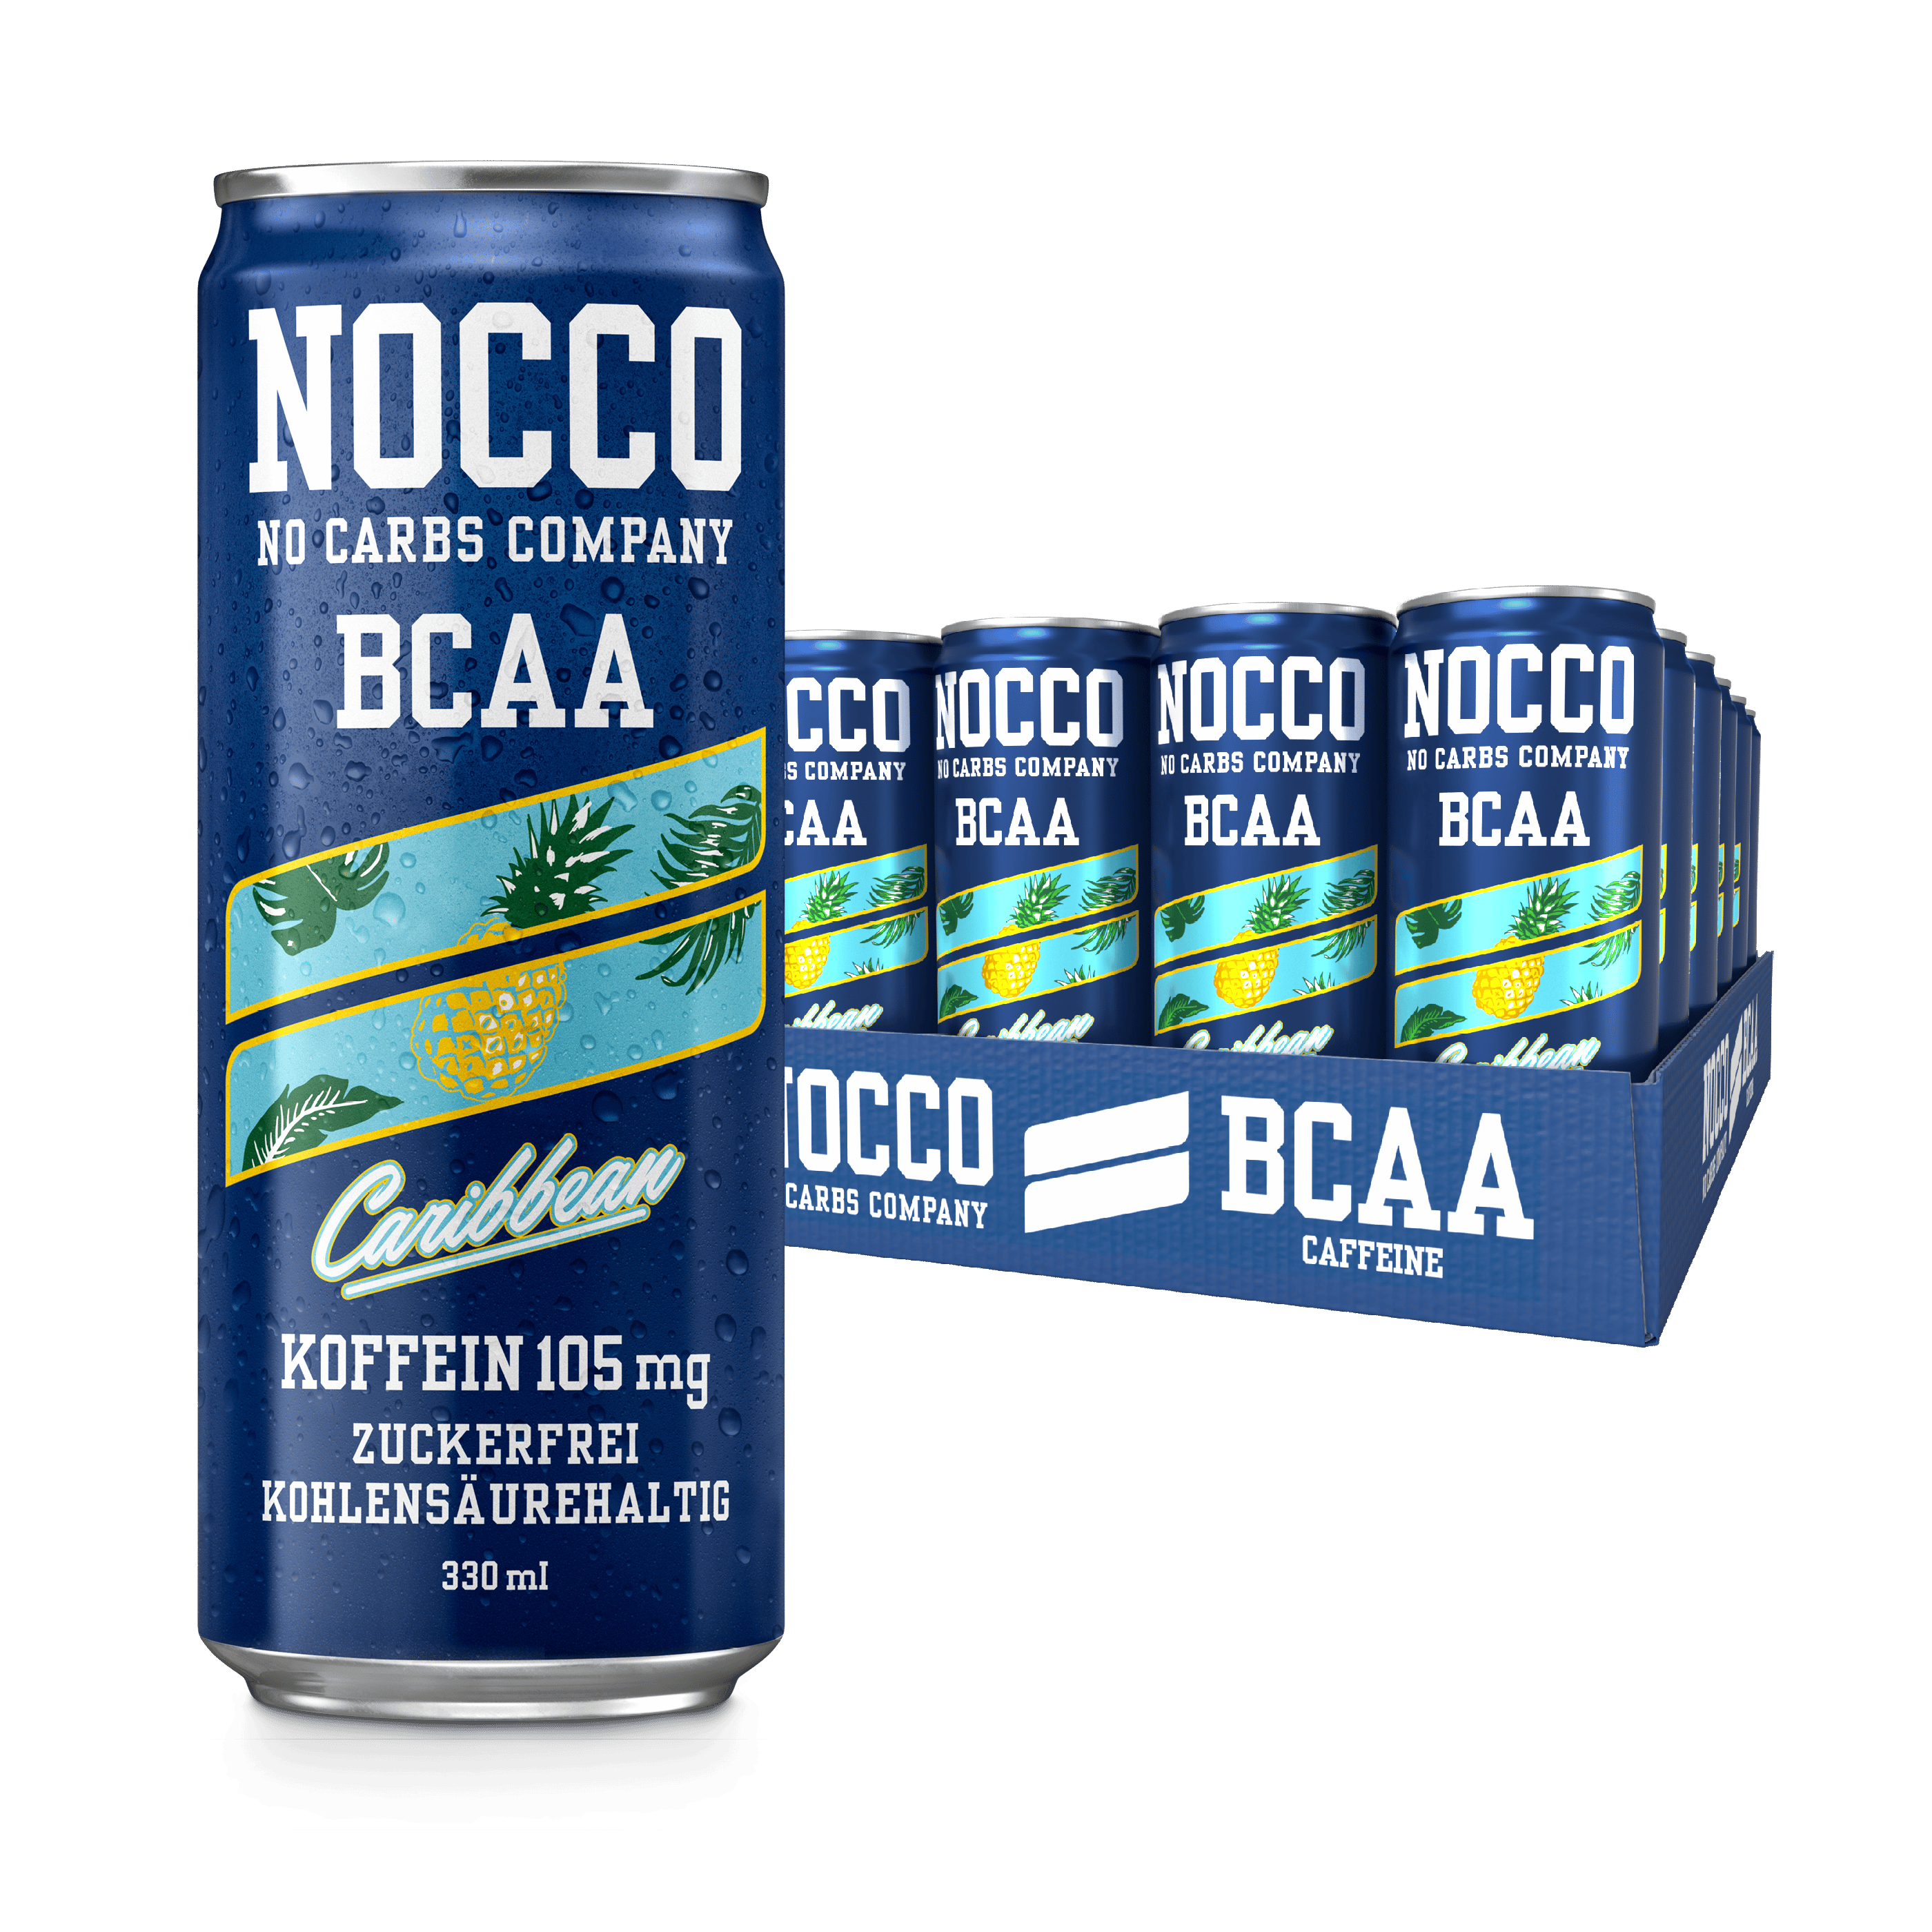 Nocco caribbean 24 pack